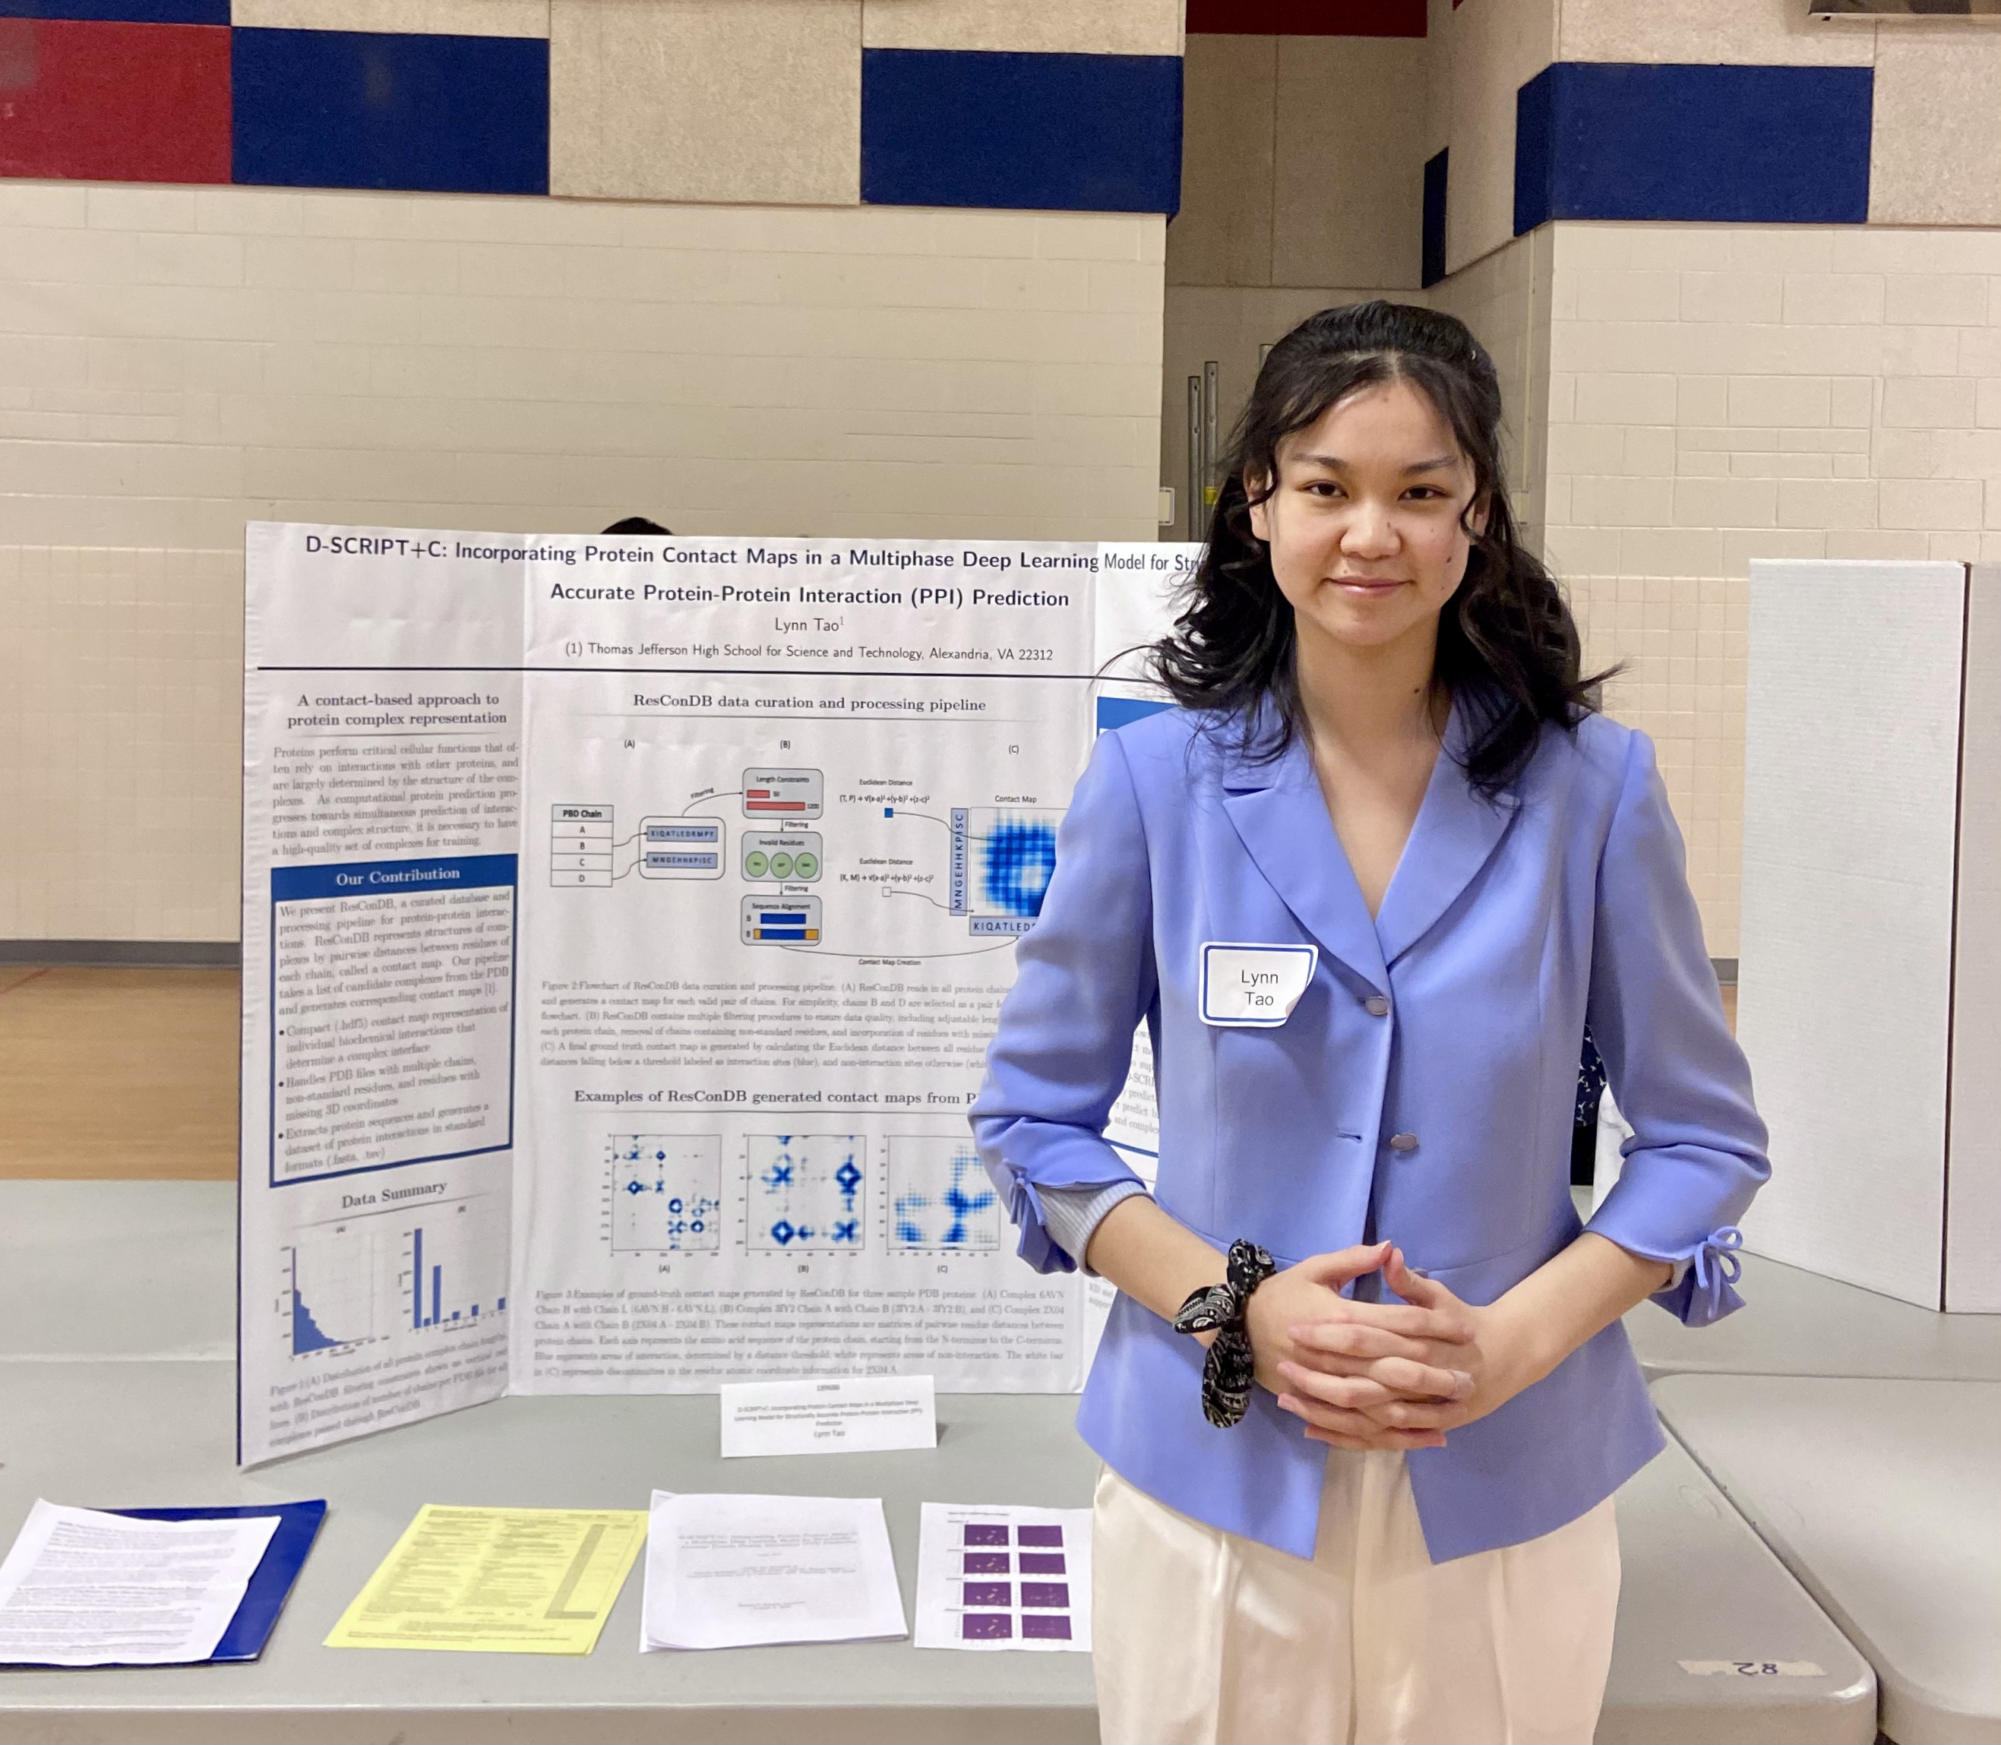 Attending the annual TJ Science and Engineering Fair, Tao presents her protein prediction model. She started the project during RSI and hopes to add to it in the future. “The protein prediction project was something that I worked on at RSI and actually continued as part of the TJ mentorship program this year. The project falls in very nicely with what I want to do in the future,” Tao said.